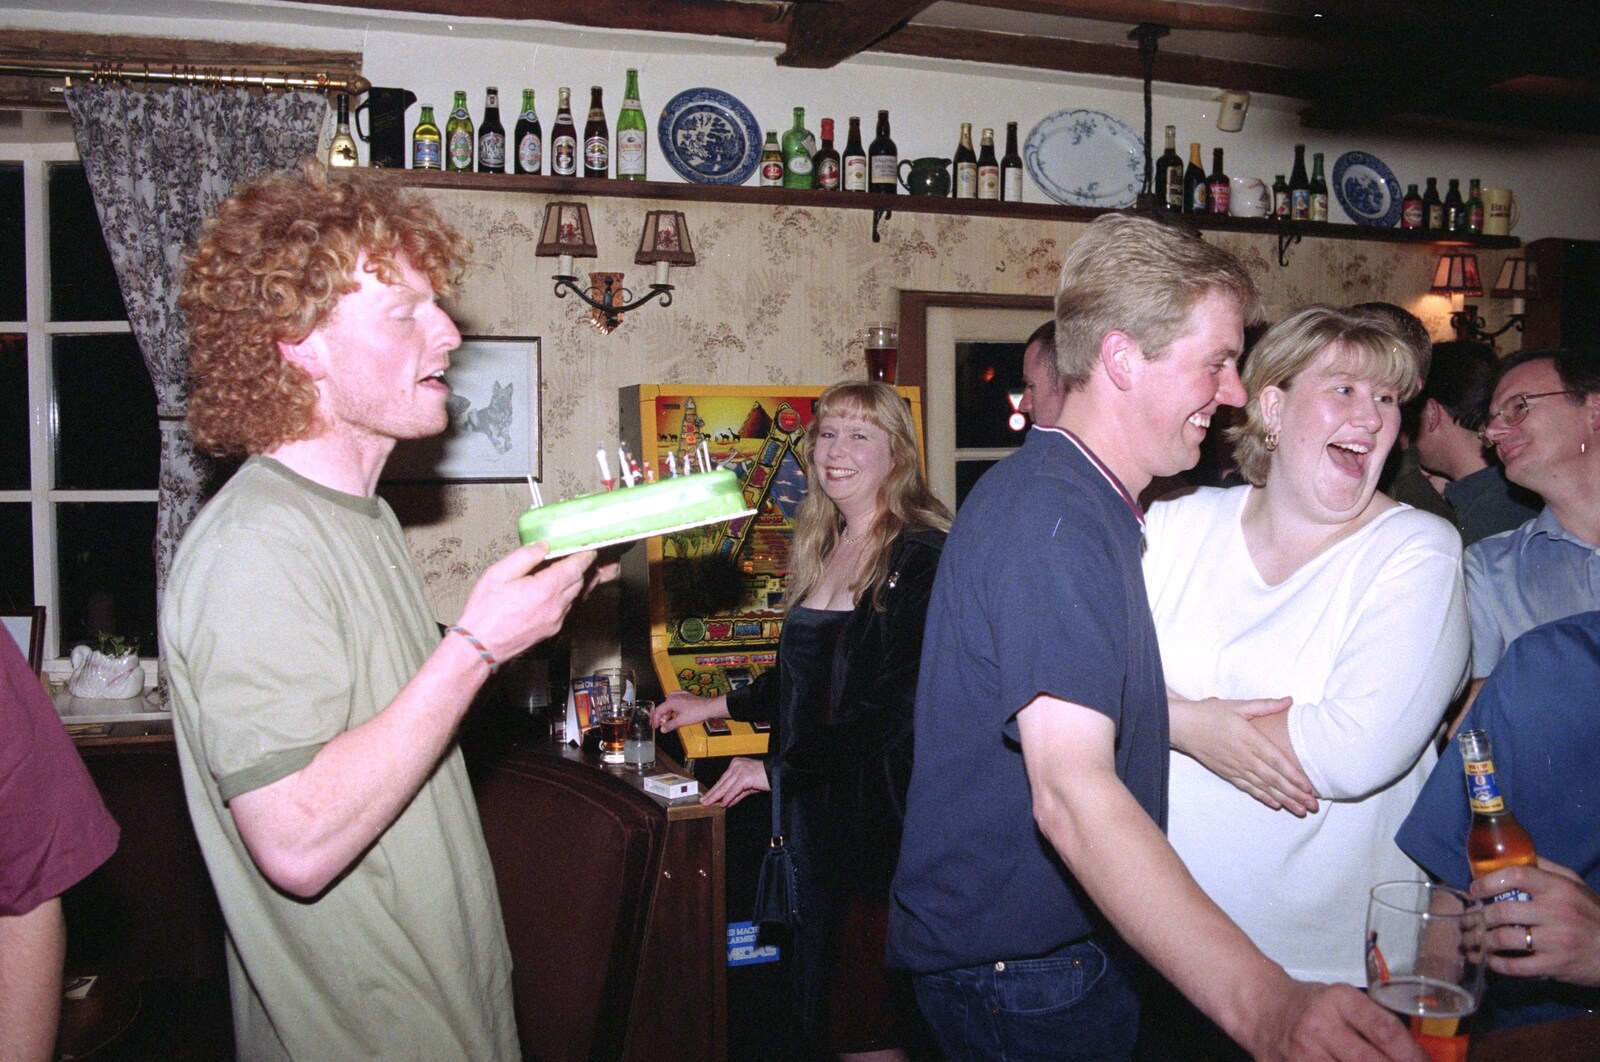 Wavy wanders off with his cake from Wavy's Thirtieth Birthday, The Swan Inn, Brome, Suffolk - 24th May 2000